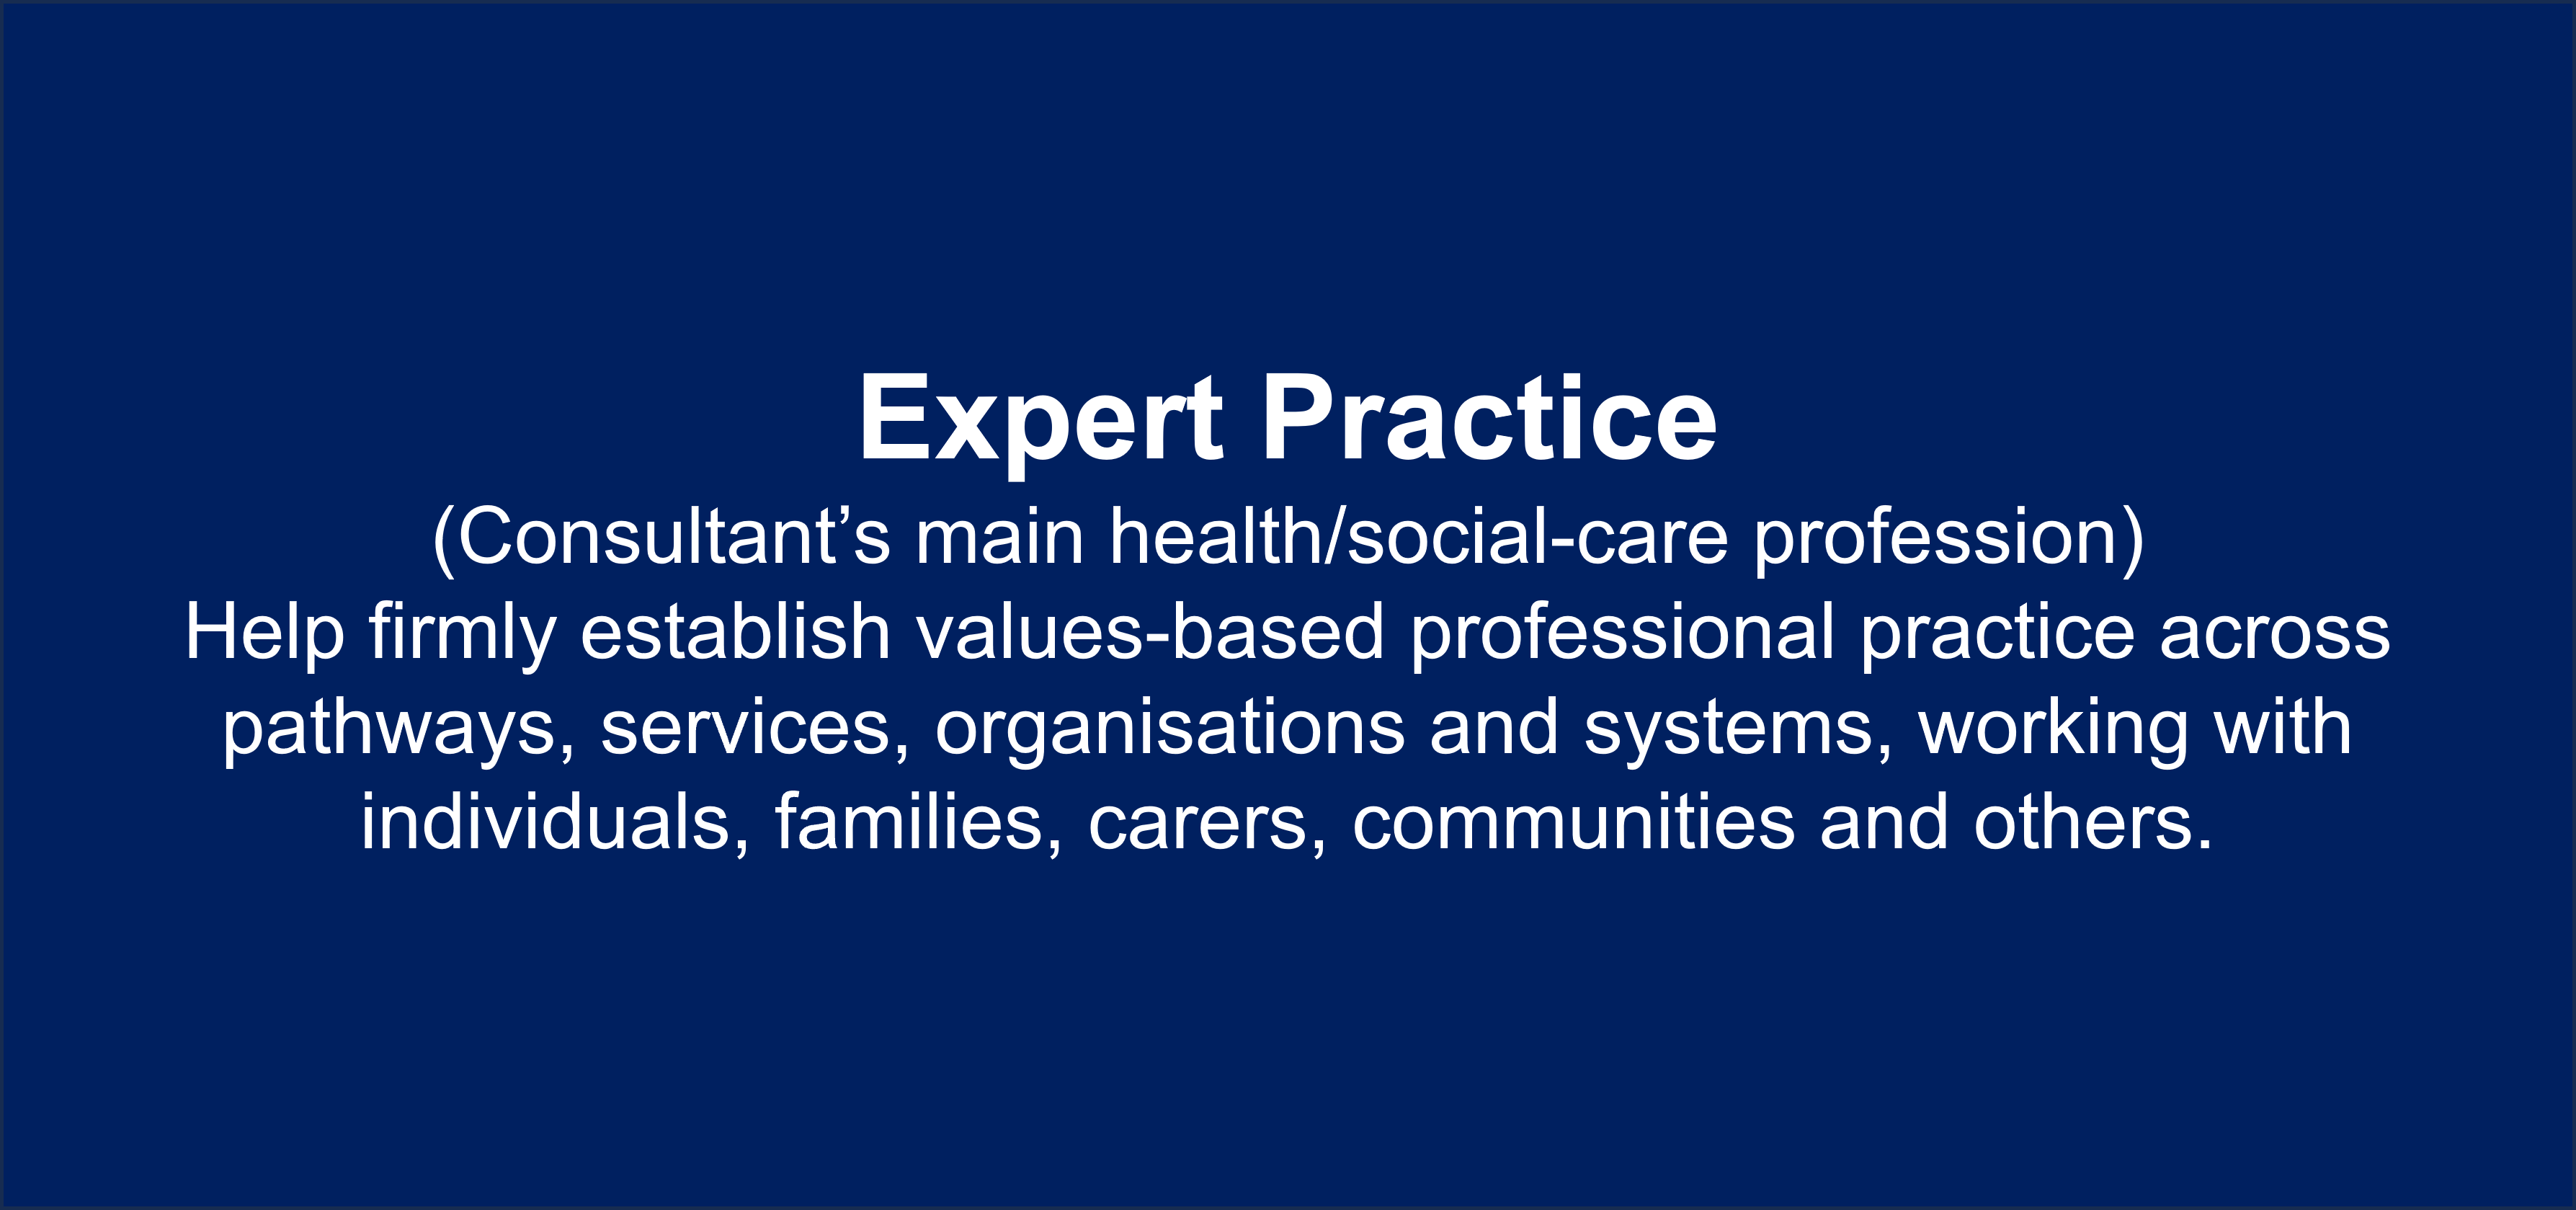 Consultant - Expert Practice
(Consultant’s main health/social-care profession)
Help firmly establish values-based professional practice across 
pathways, services, organisations and systems, working with 
individuals, families, carers, communities and others.
